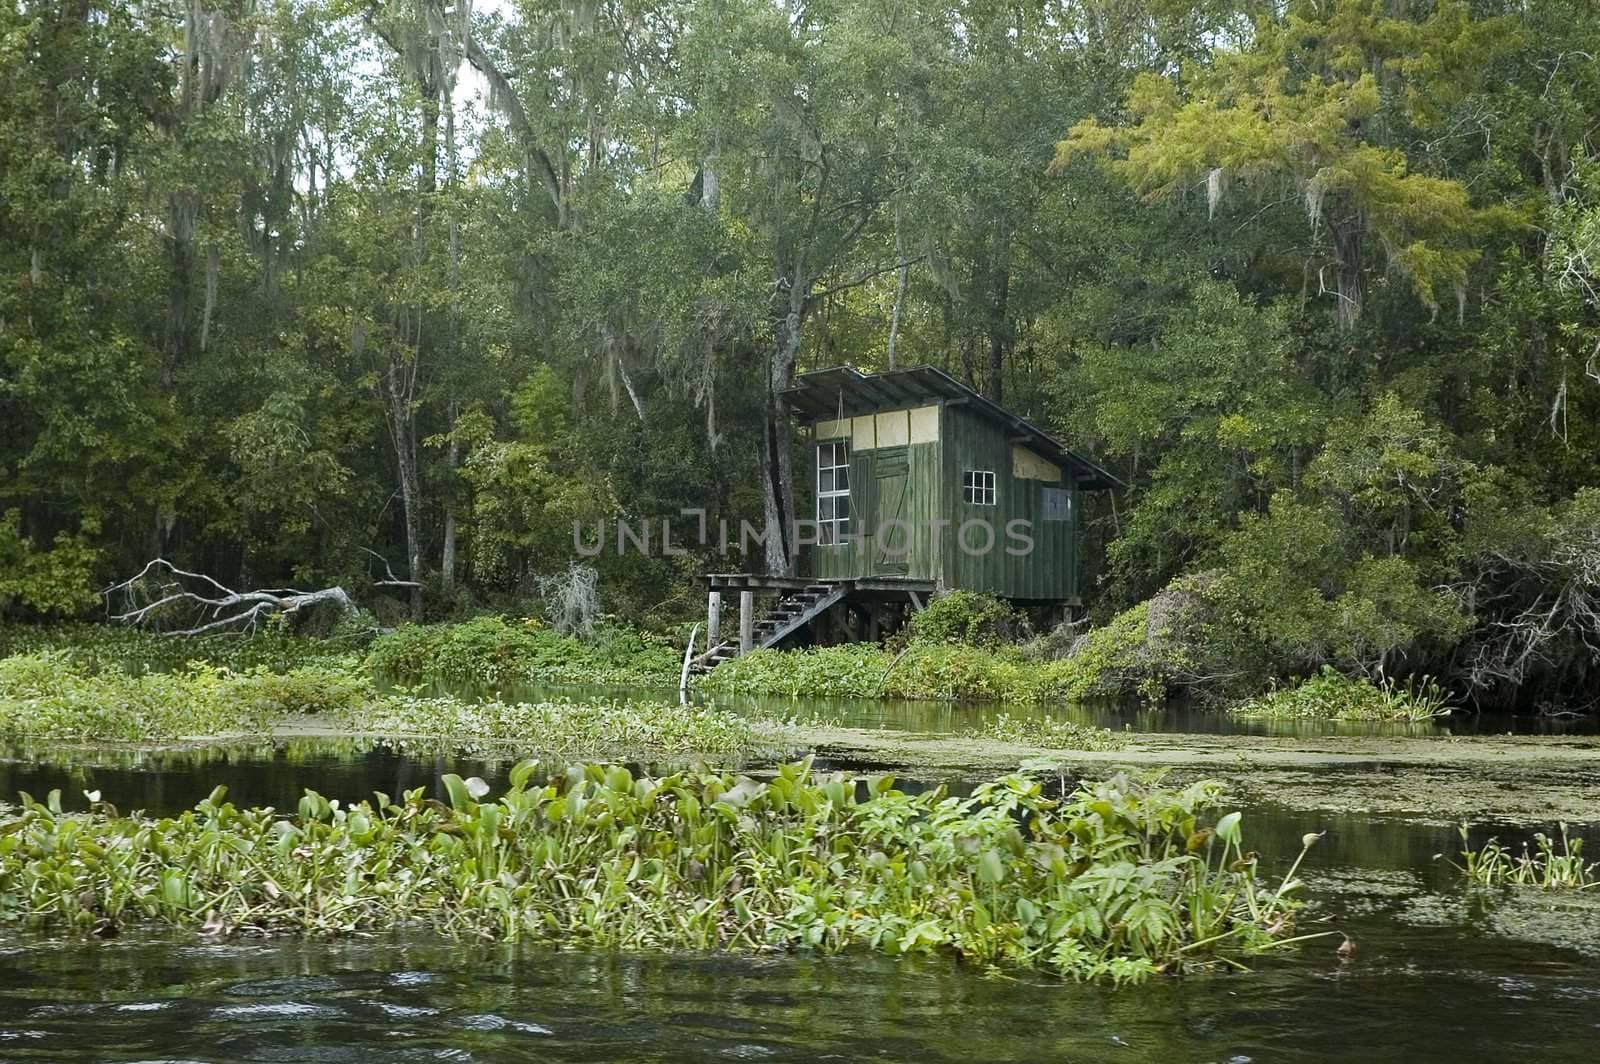 An old fishing shack on the St. Marks River in Florida.